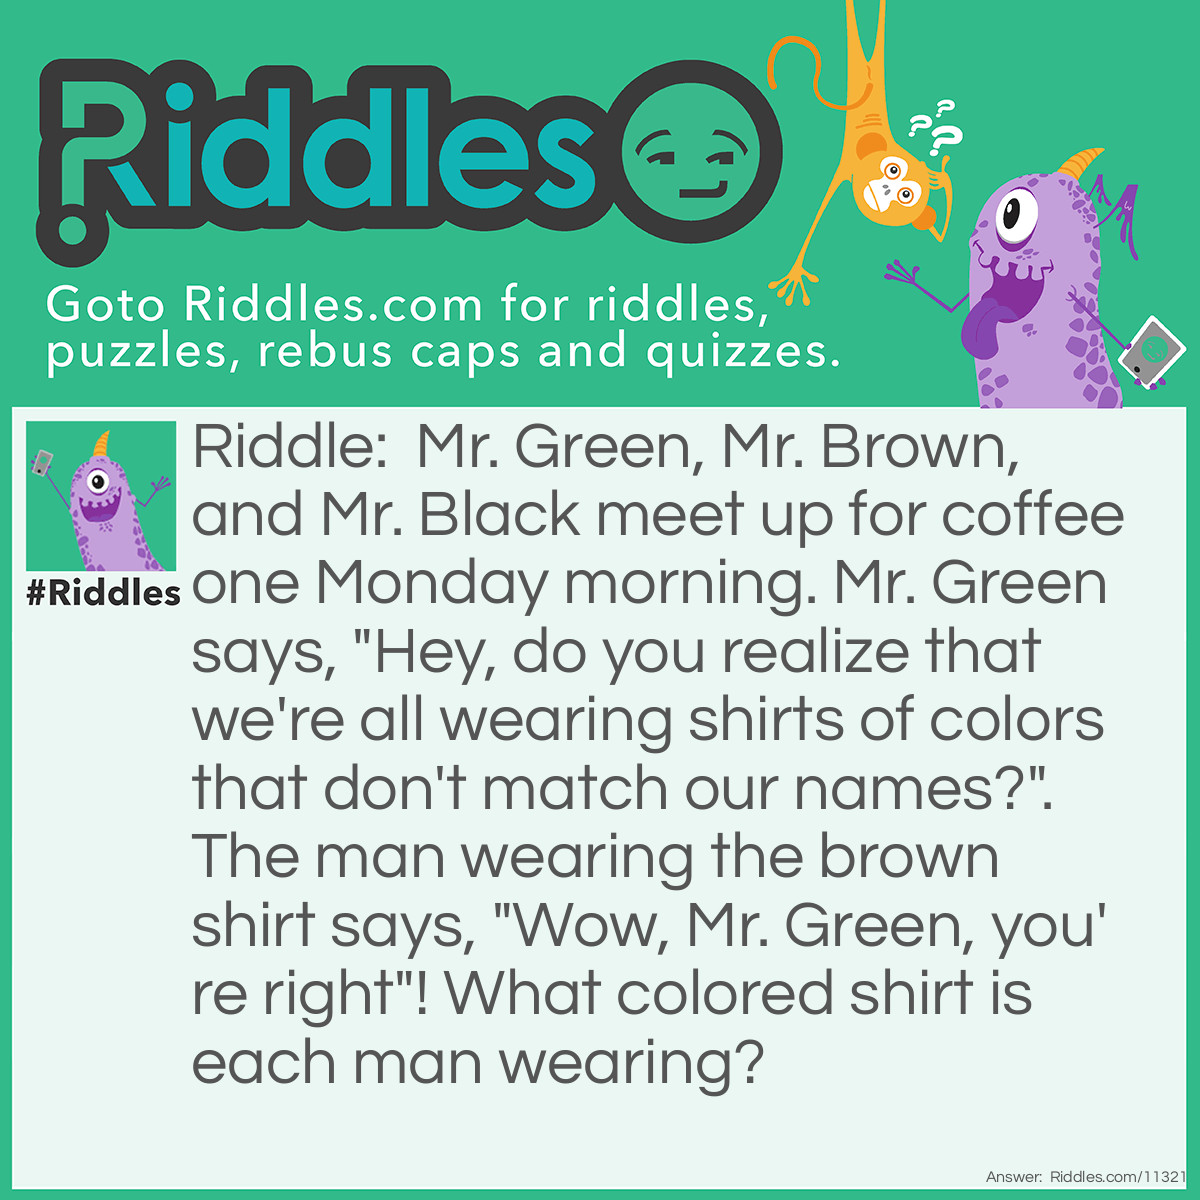 Riddle: Mr. Green, Mr. Brown, and Mr. Black meet up for coffee one Monday morning. Mr. Green says, "Hey, do you realize that we're all wearing shirts of colors that don't match our names?". The man wearing the brown shirt says, "Wow, Mr. Green, you're right"! What colored shirt is each man wearing? Answer: Mr. Green cannot be wearing the green shirt, because his statement that all three men are wearing shirts that don't match their names is correct. And he cannot be wearing the brown shirt, because the man wearing the brown shirt replied to his words, and let's be honest–it doesn't make sense to reply to your OWN words, right? This means Mr. Green can only be wearing the black shirt. Mr. Brown can either be wearing a green or a black shirt. The black shirt is already taken, so Mr. Brown is wearing the green shirt. And Mr. Black is wearing the brown shirt.